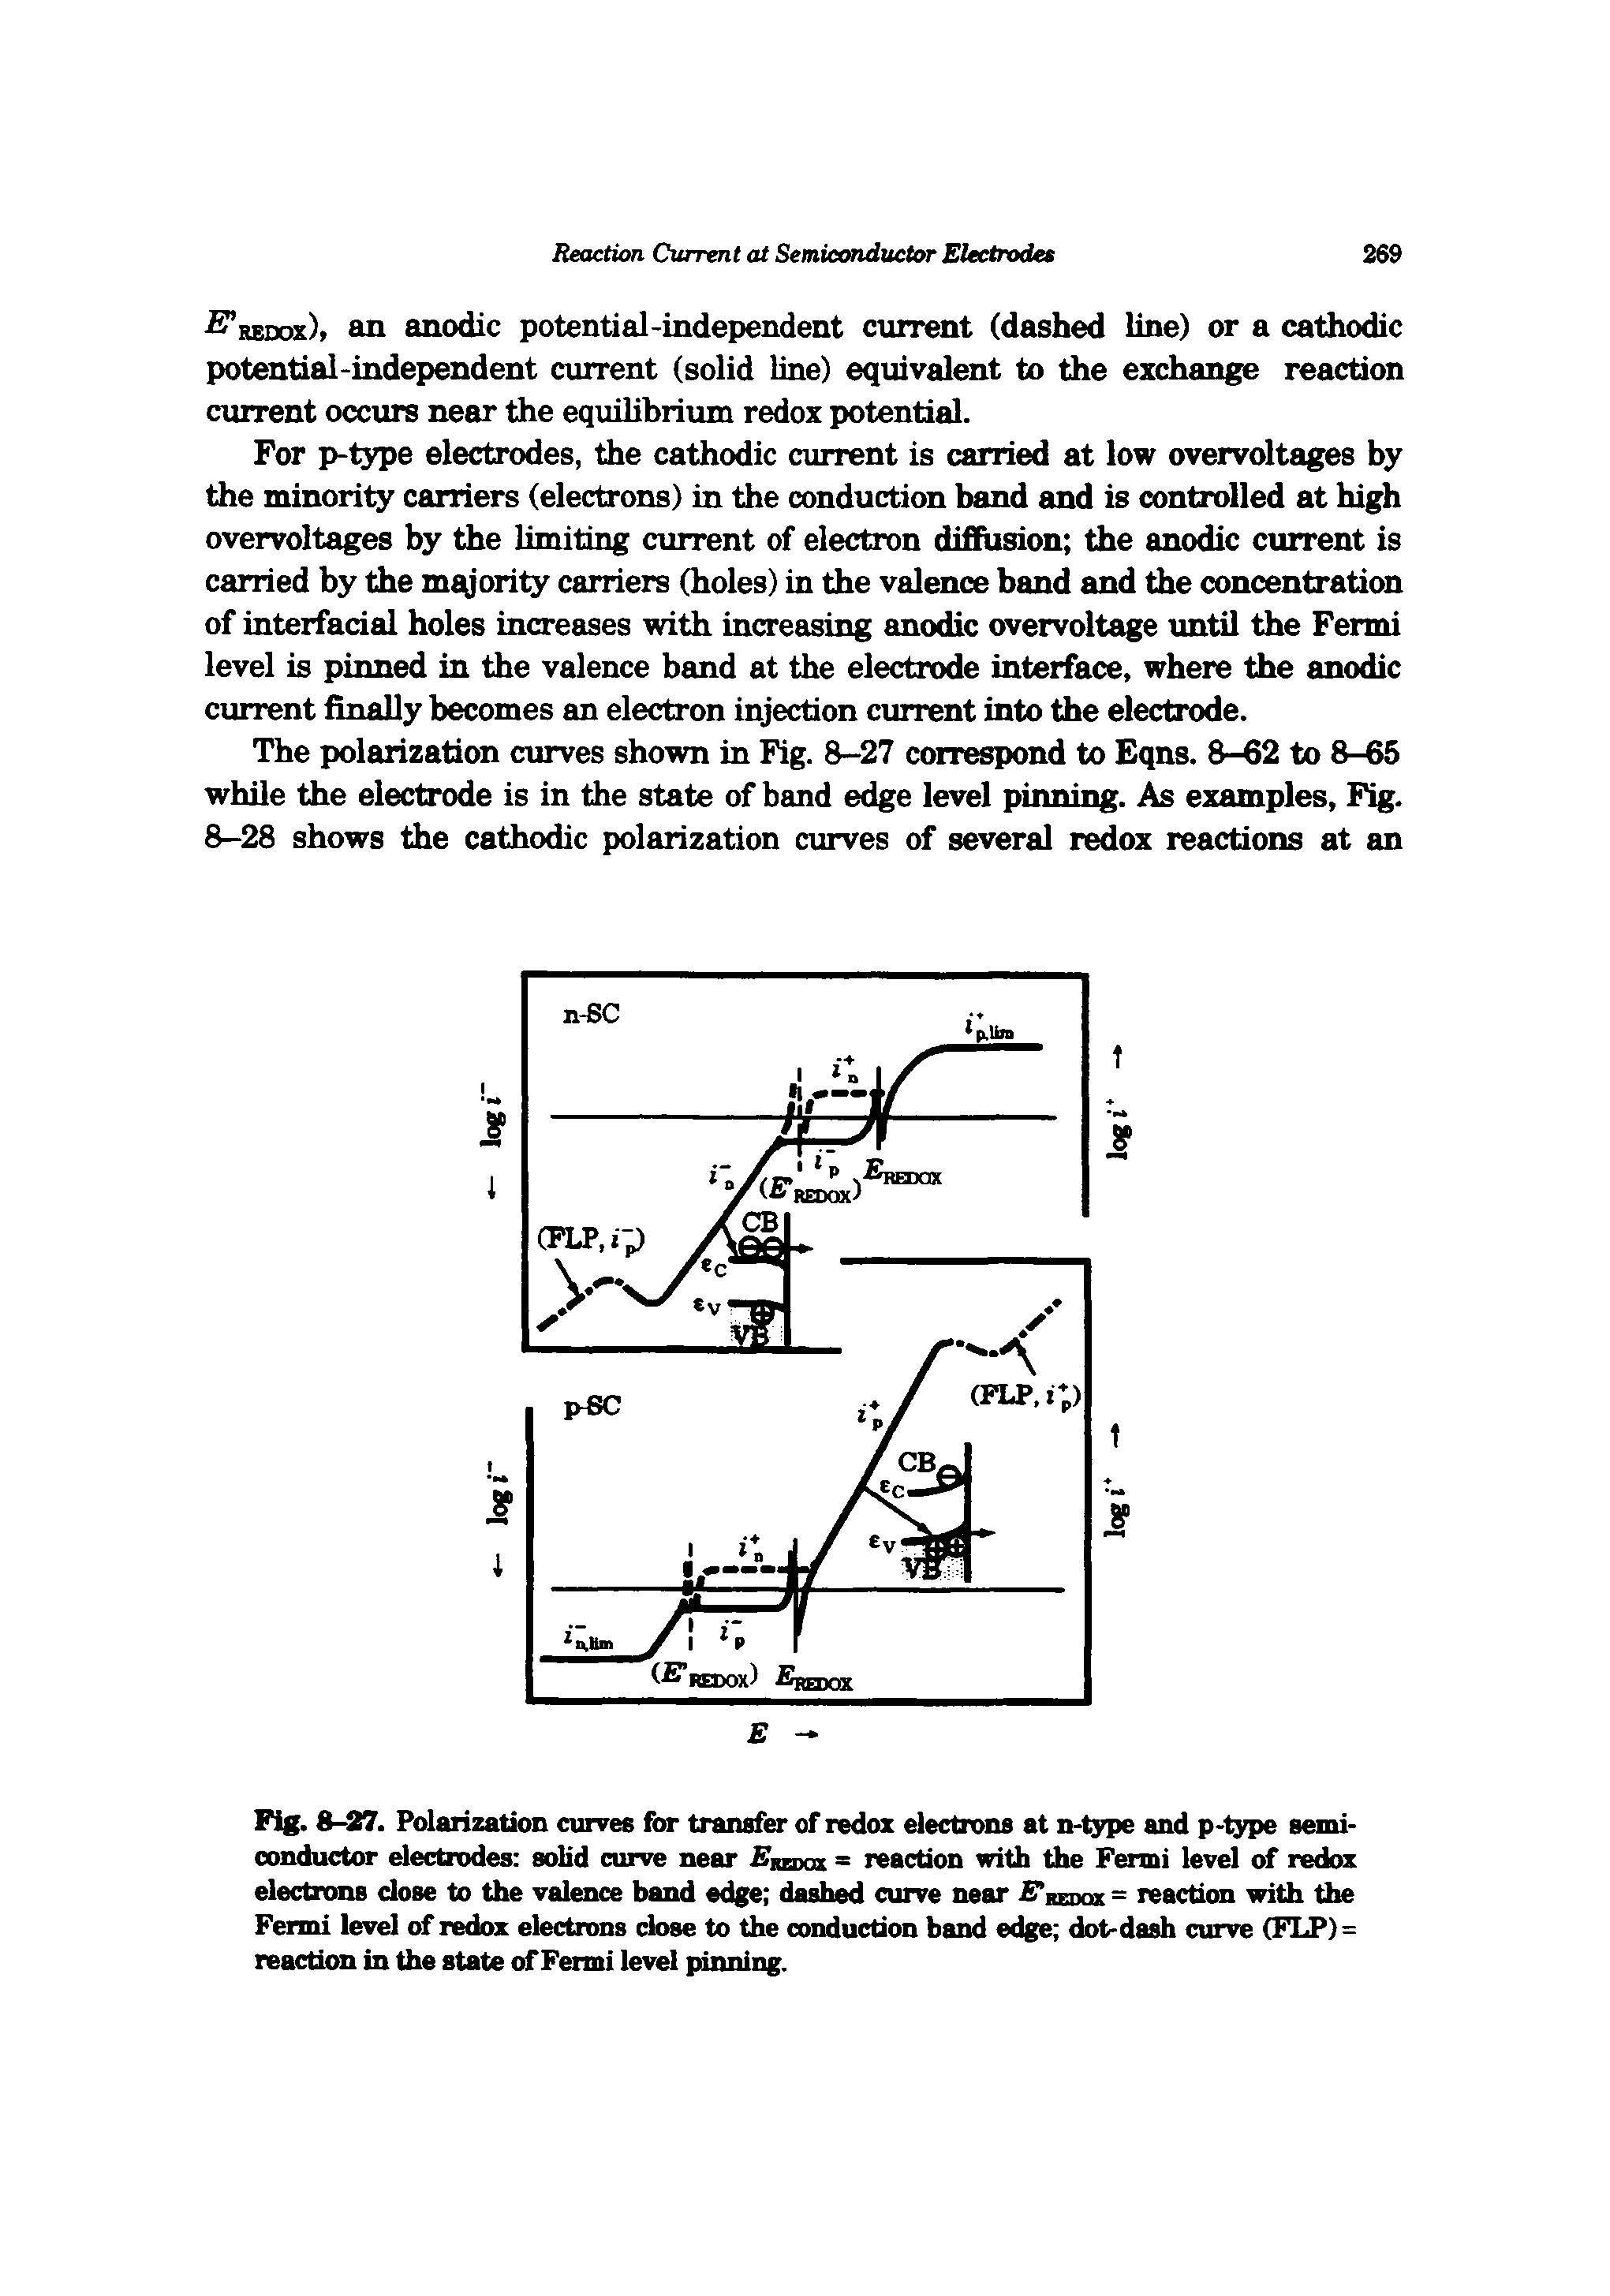 Fig. 8-27. Polarization curves for transfer of redox electrons at n-type and p-type semiconductor electrodes solid curve near Egaxa = reaction with the Fermi level of redox electrons dose to the valence band edge dashed curve near F redok = reaction with the Fermi level of redox electrons dose to the conduction band edge dot-dash curve (FLP)= reaction in the state of Fermi level pinning.